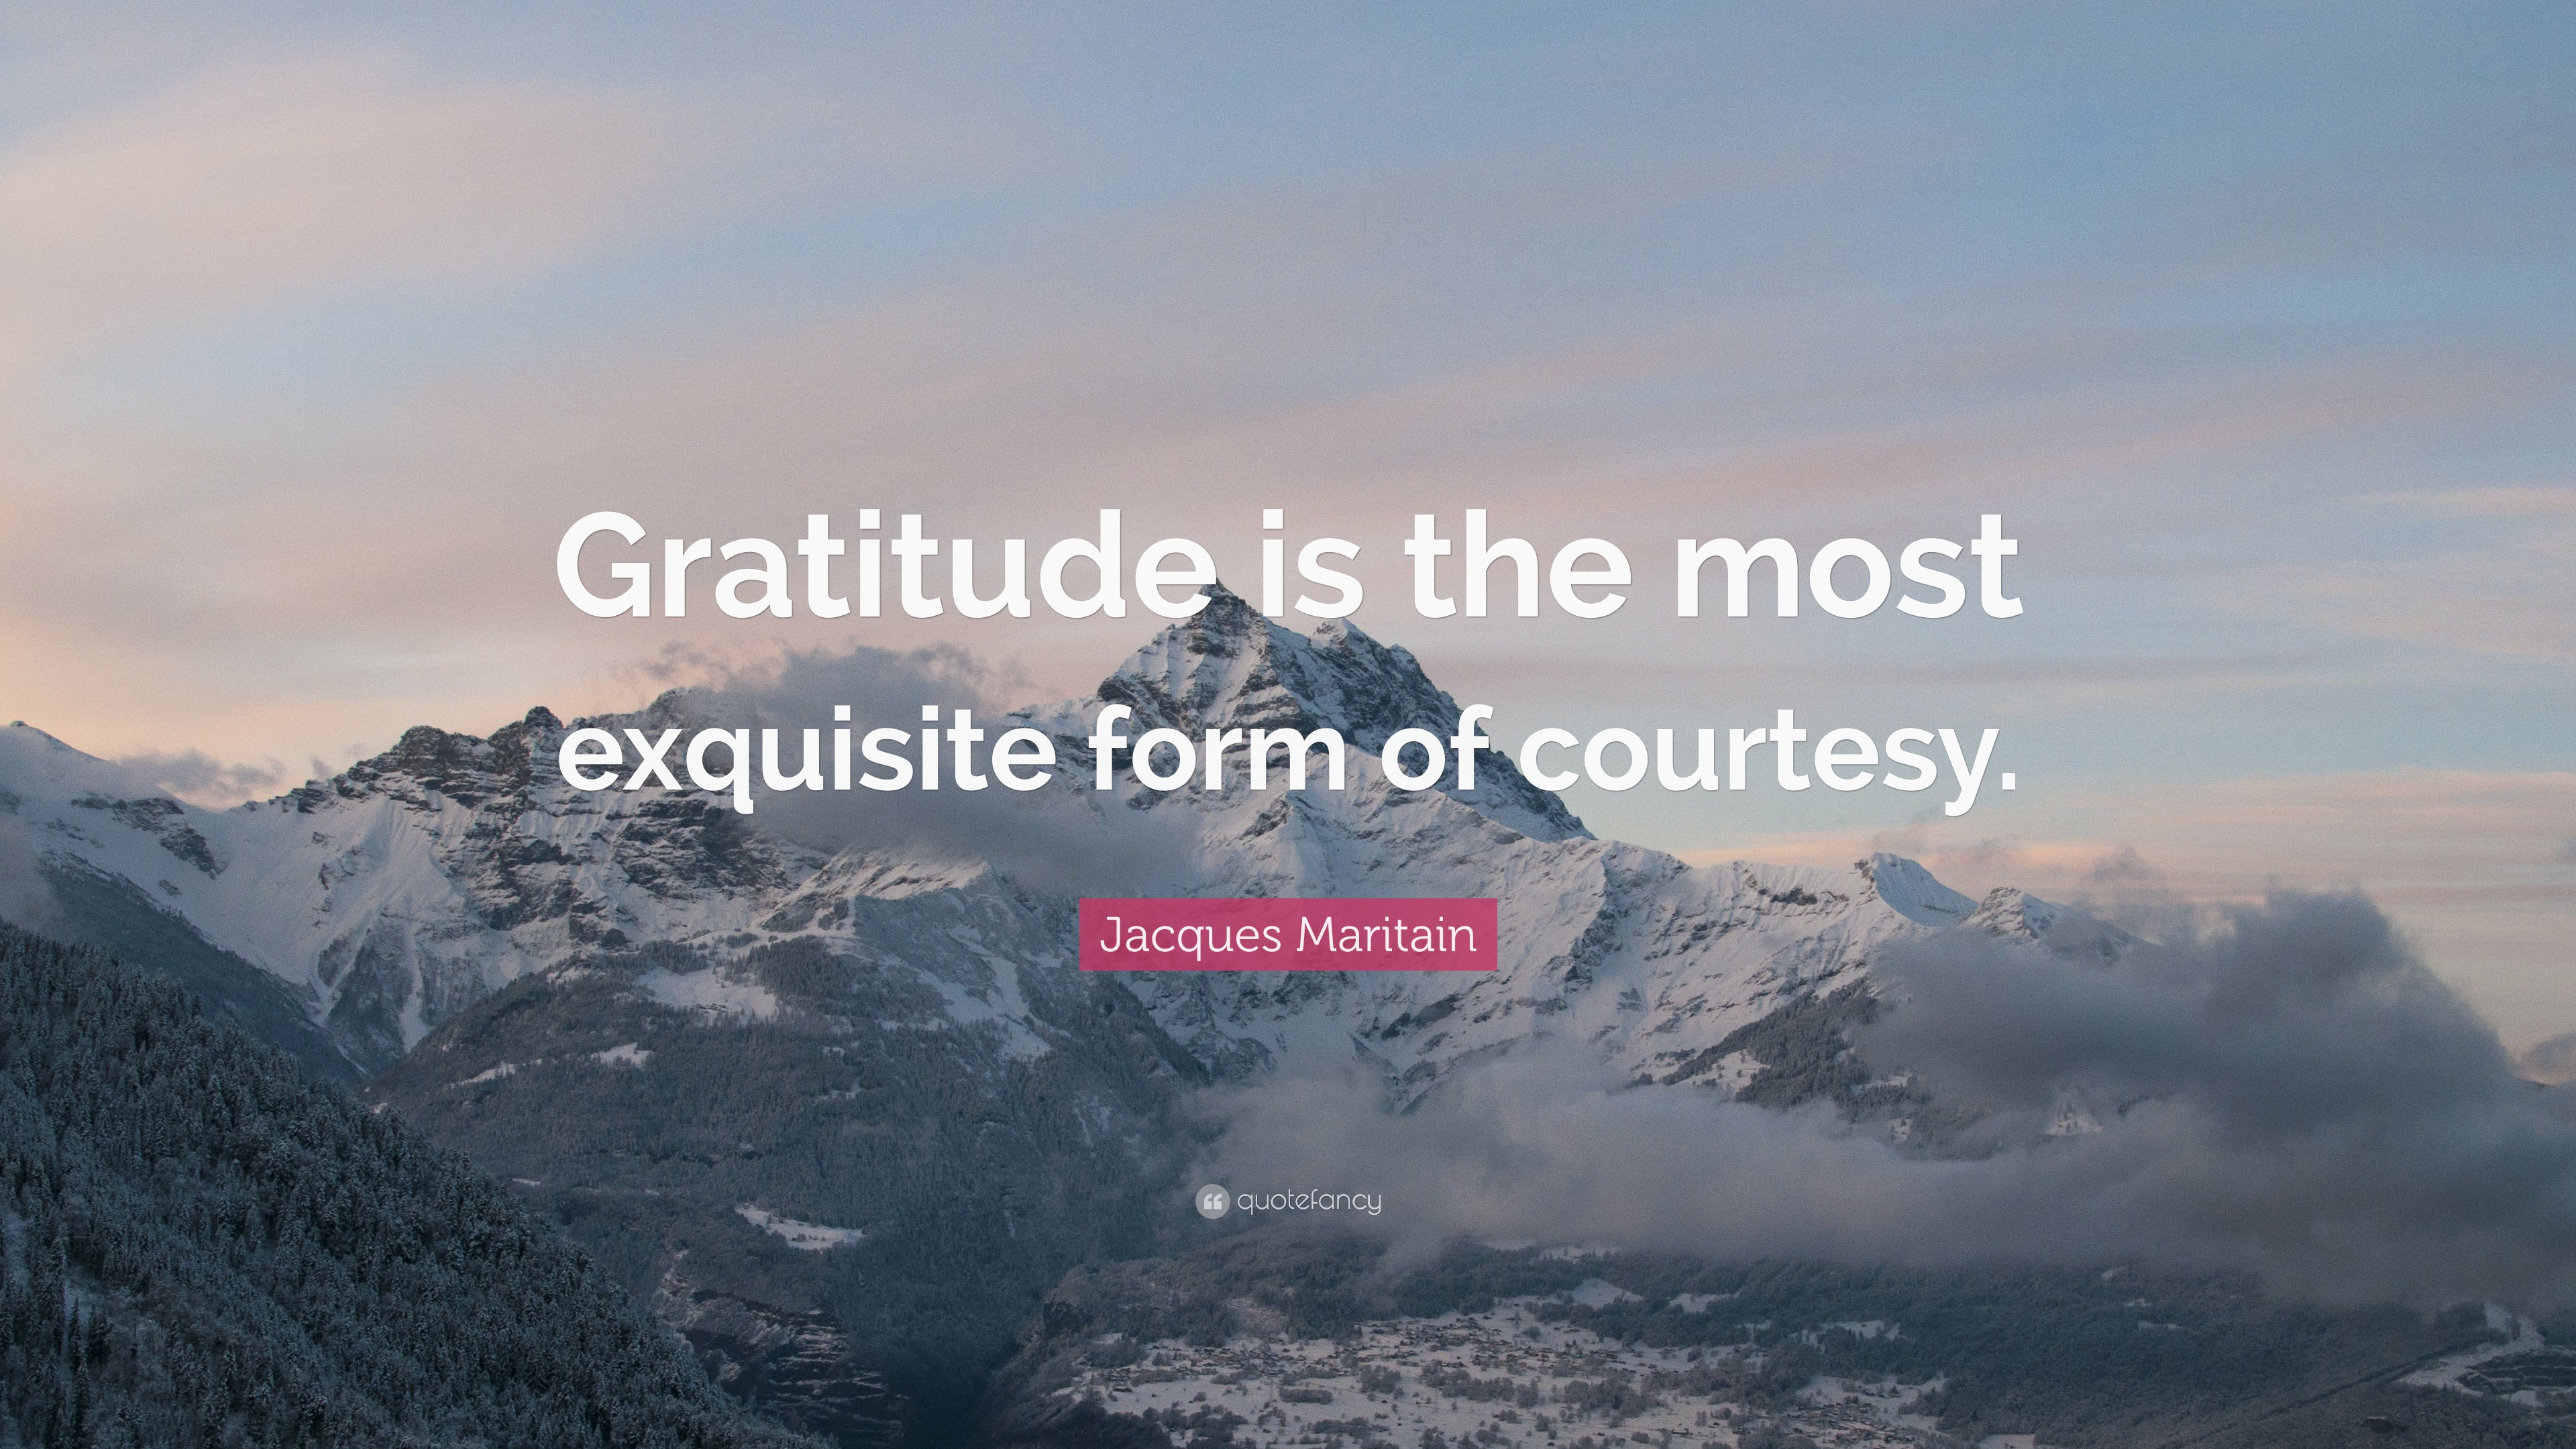 Jacques Maritain quote: Gratitude is the most exquisite form of courtesy.